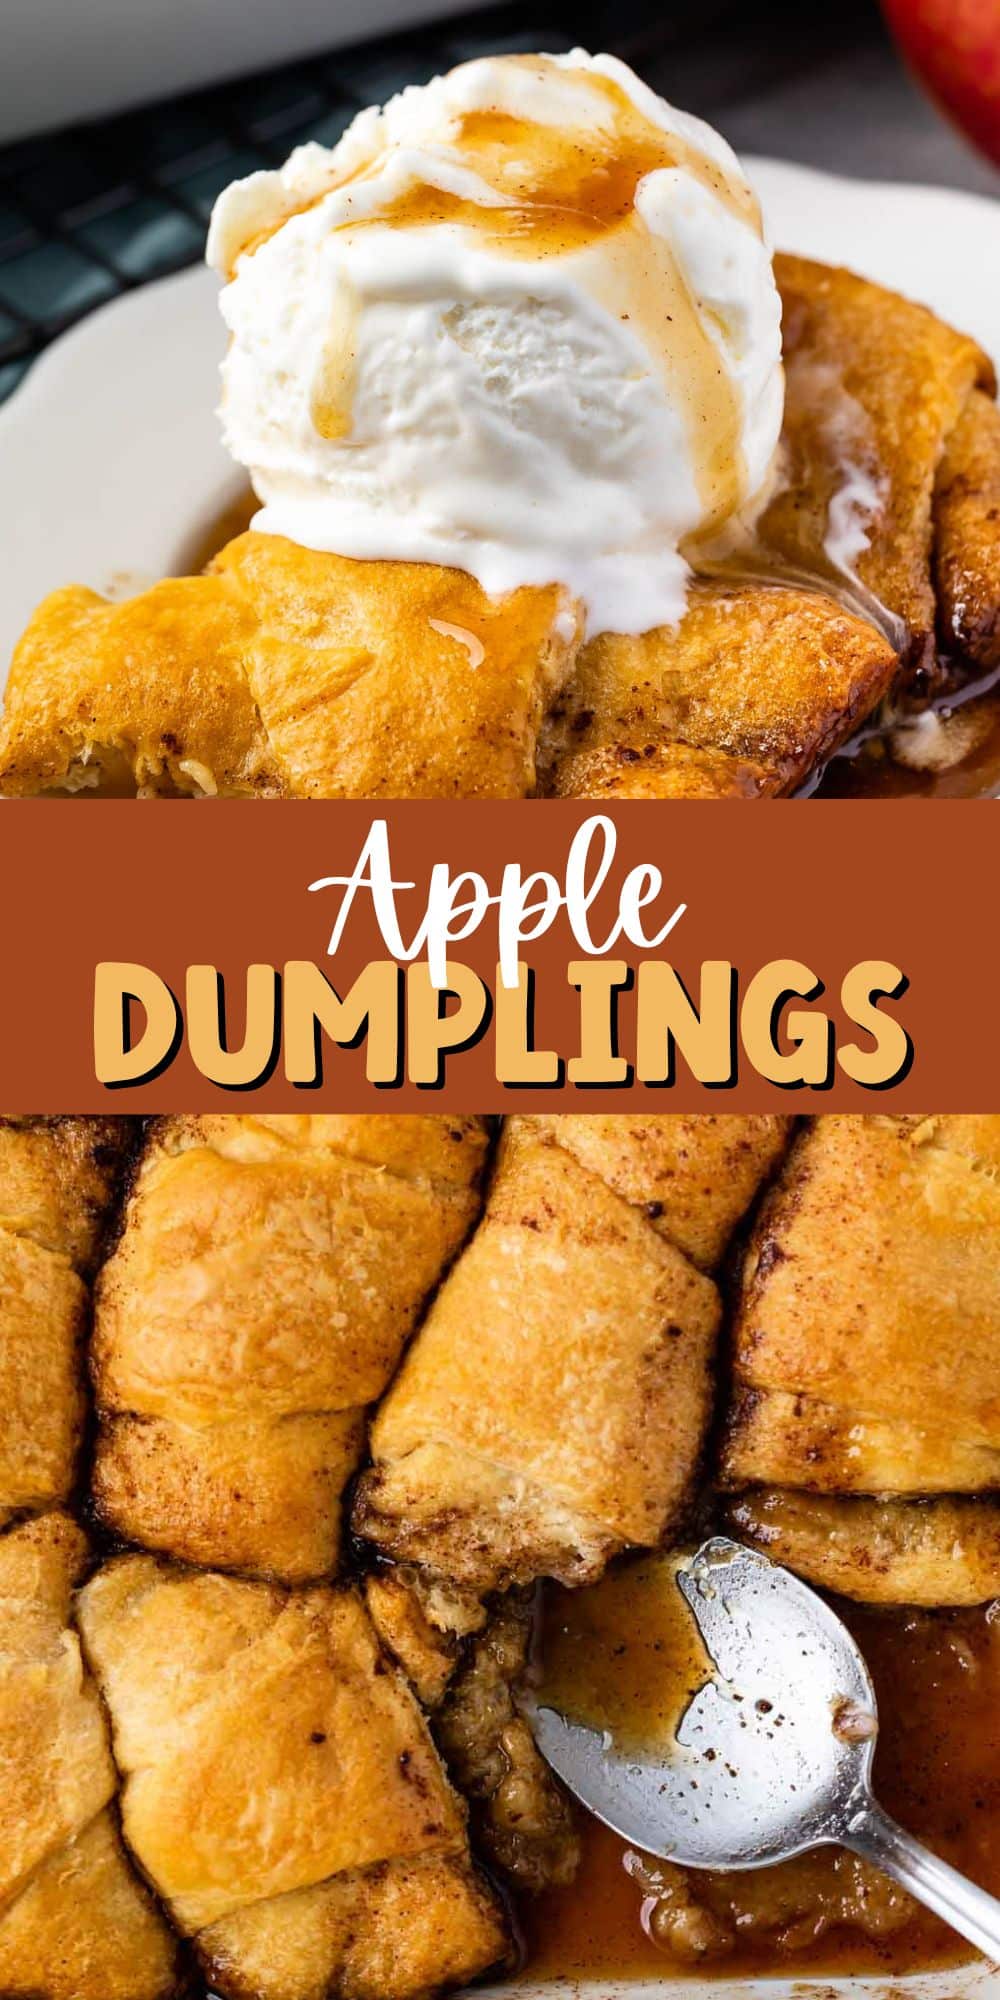 two photos of apple dumplings with one being a slice and the other showing multiple in a pan